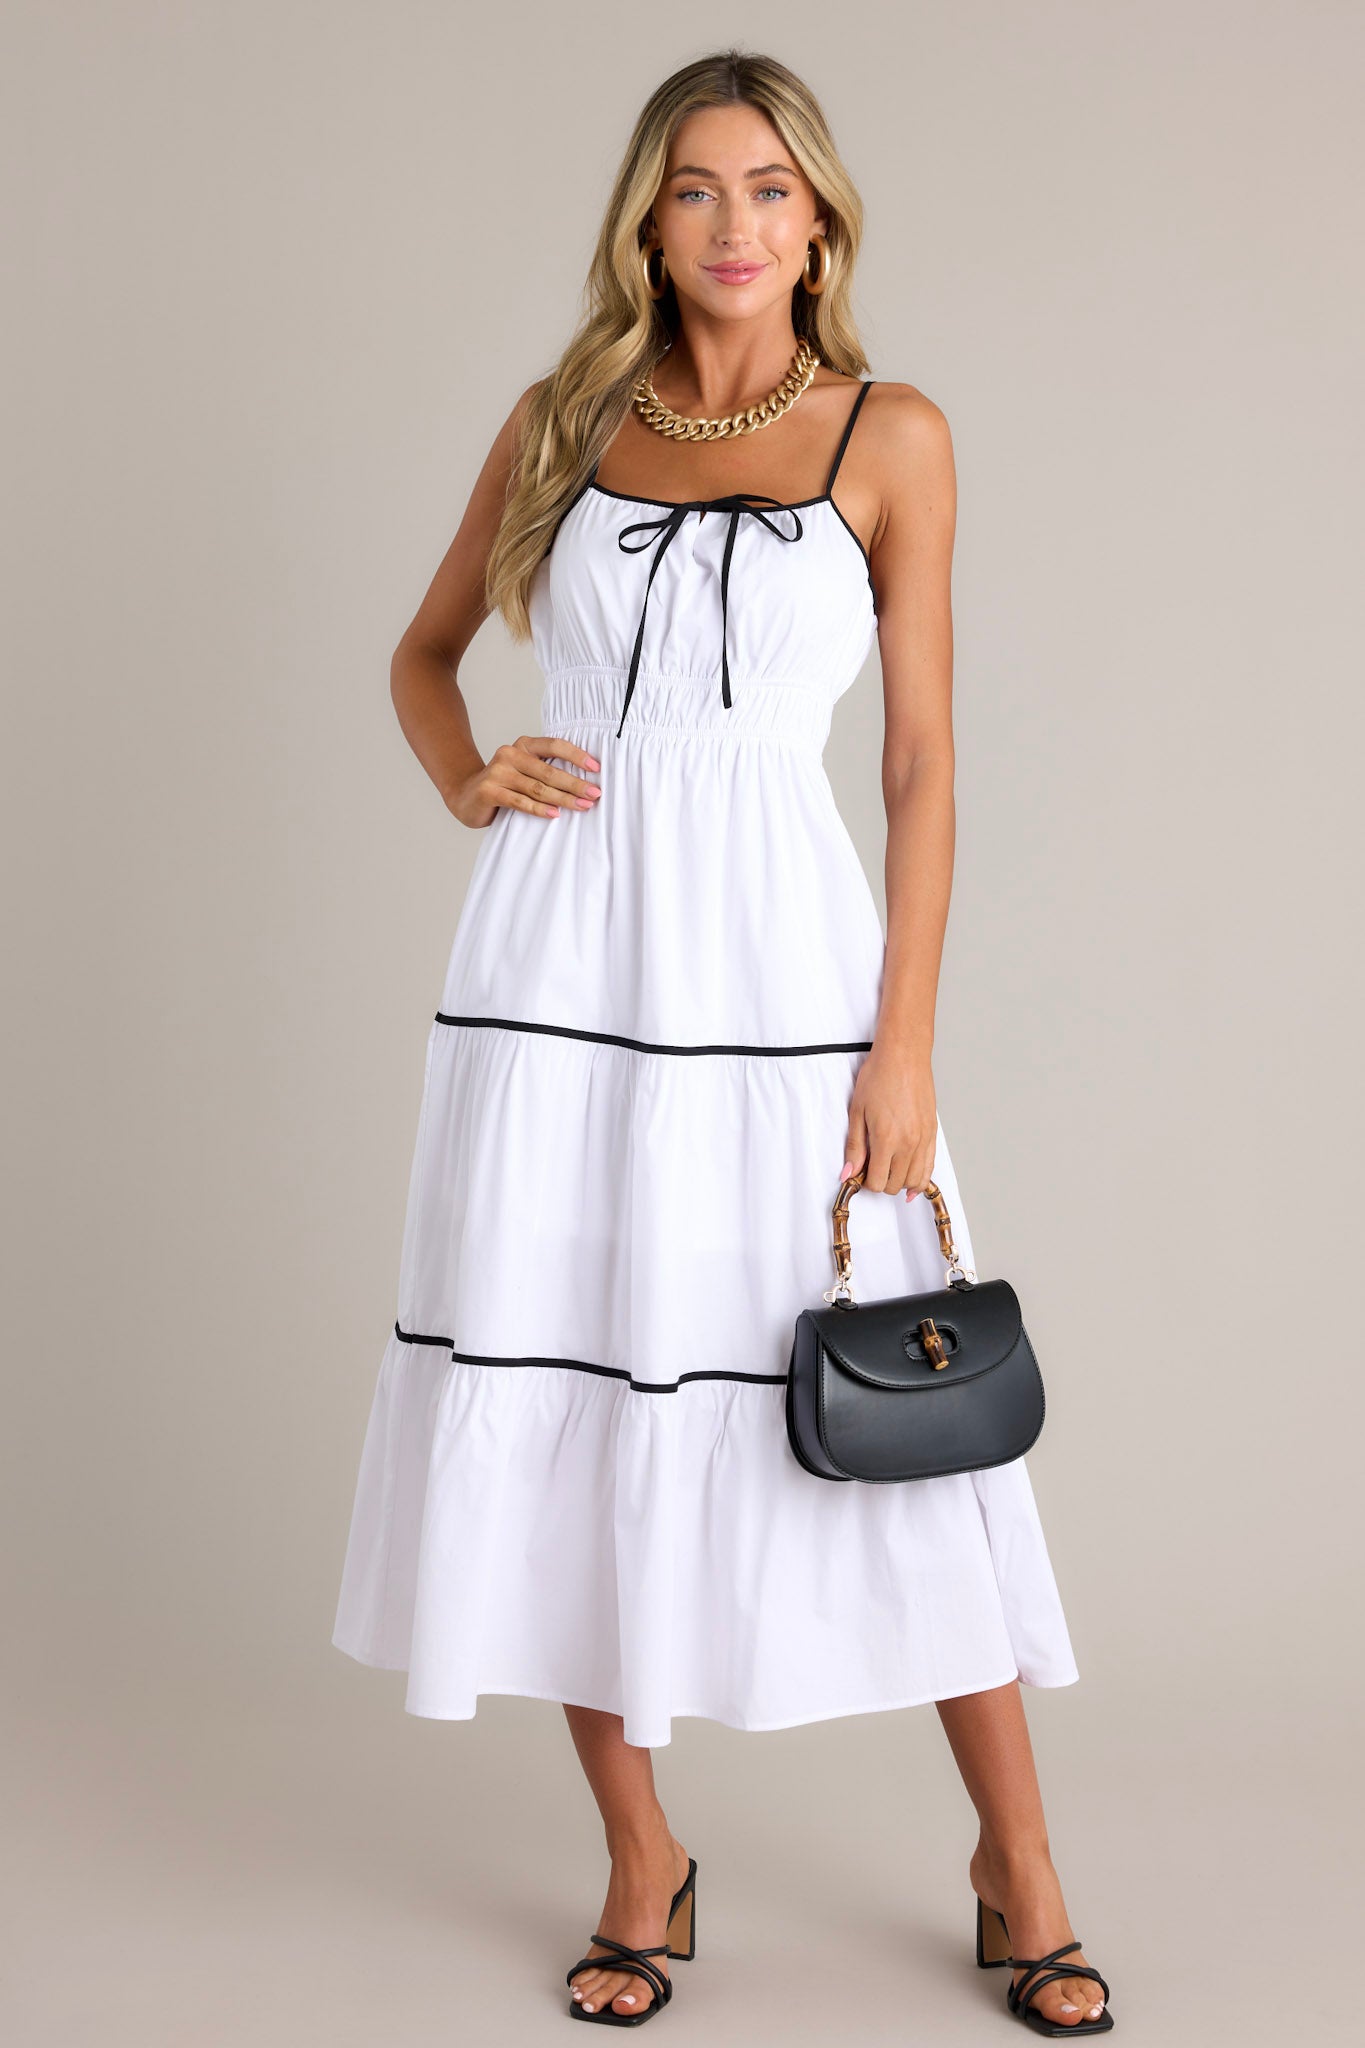 This white midi dress features a square neckline, thin adjustable straps, a self-tie bust feature, an elastic waist, contrasting tiers, and a flowing silhouette.